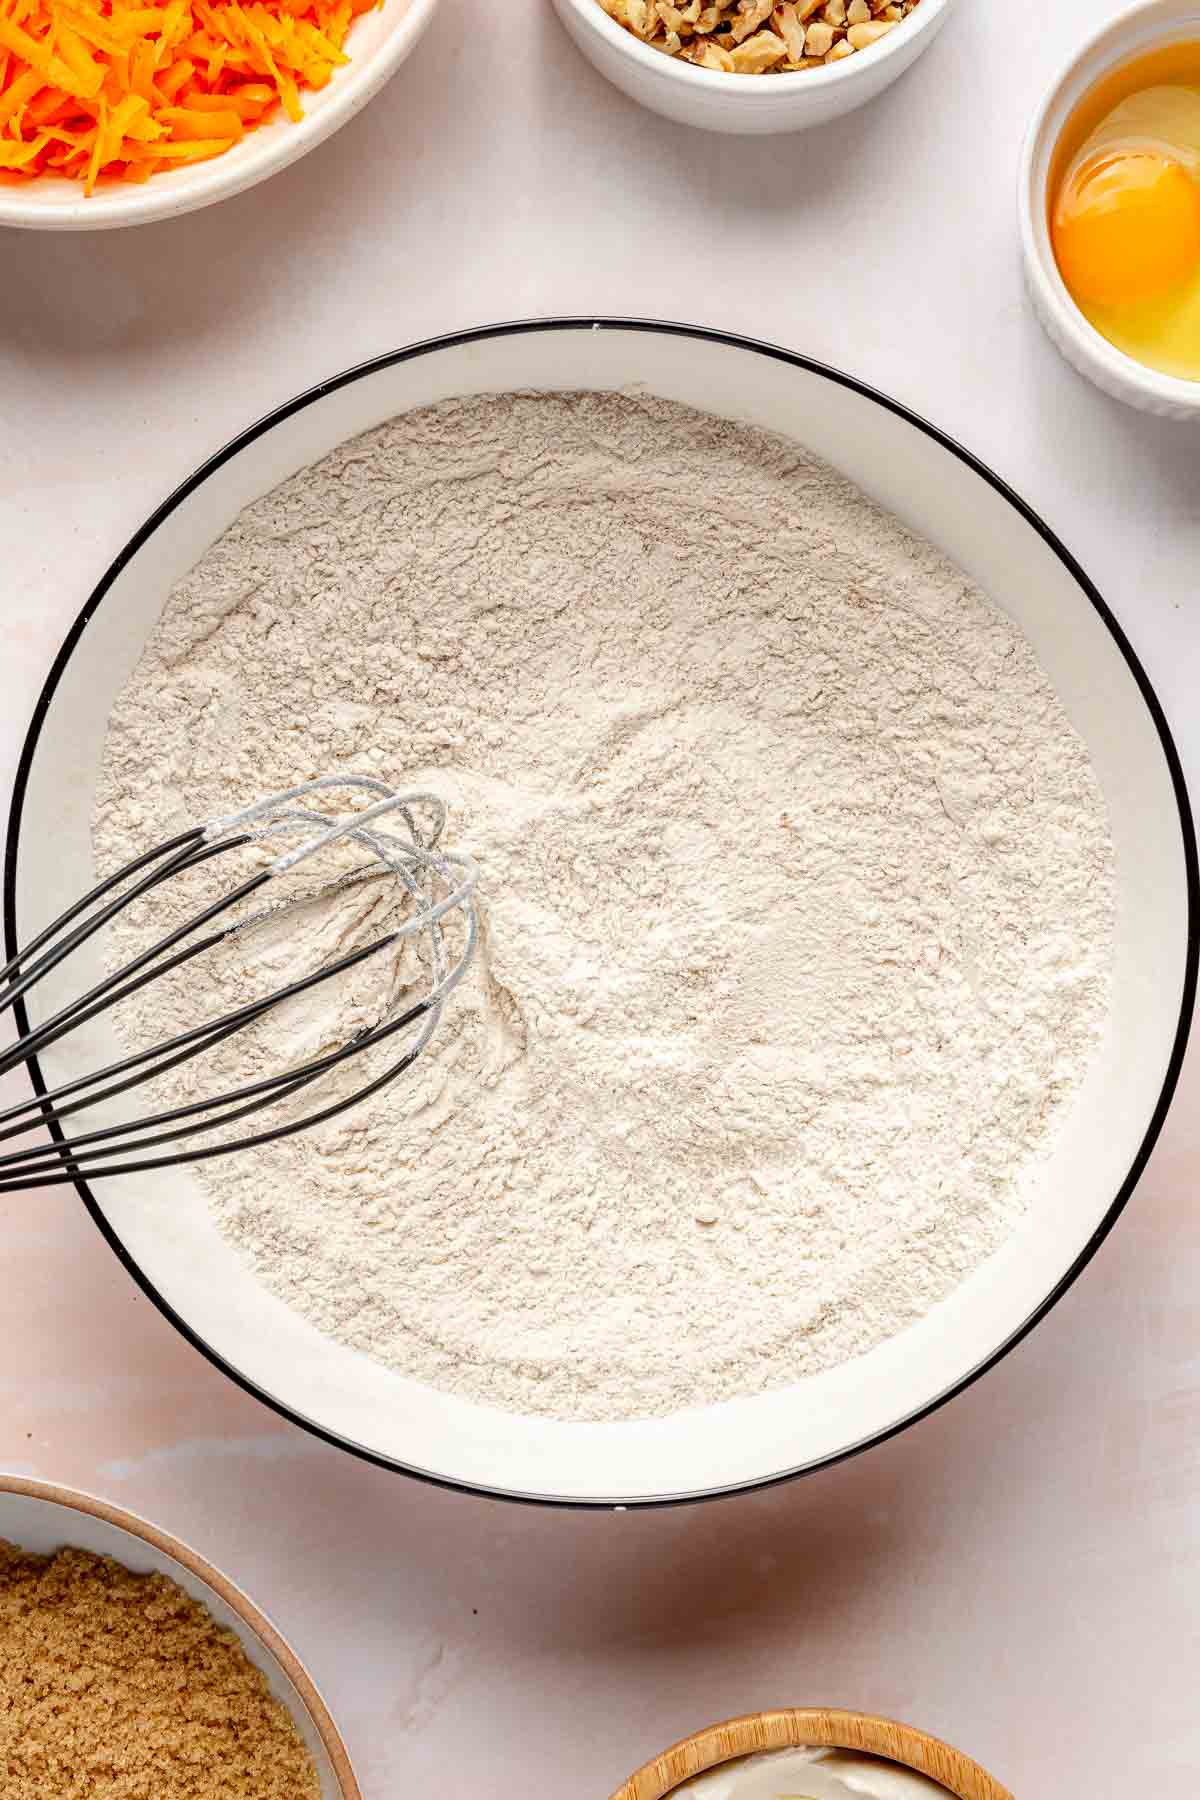 Using a whisk to mix flour with baking powder and baking soda.